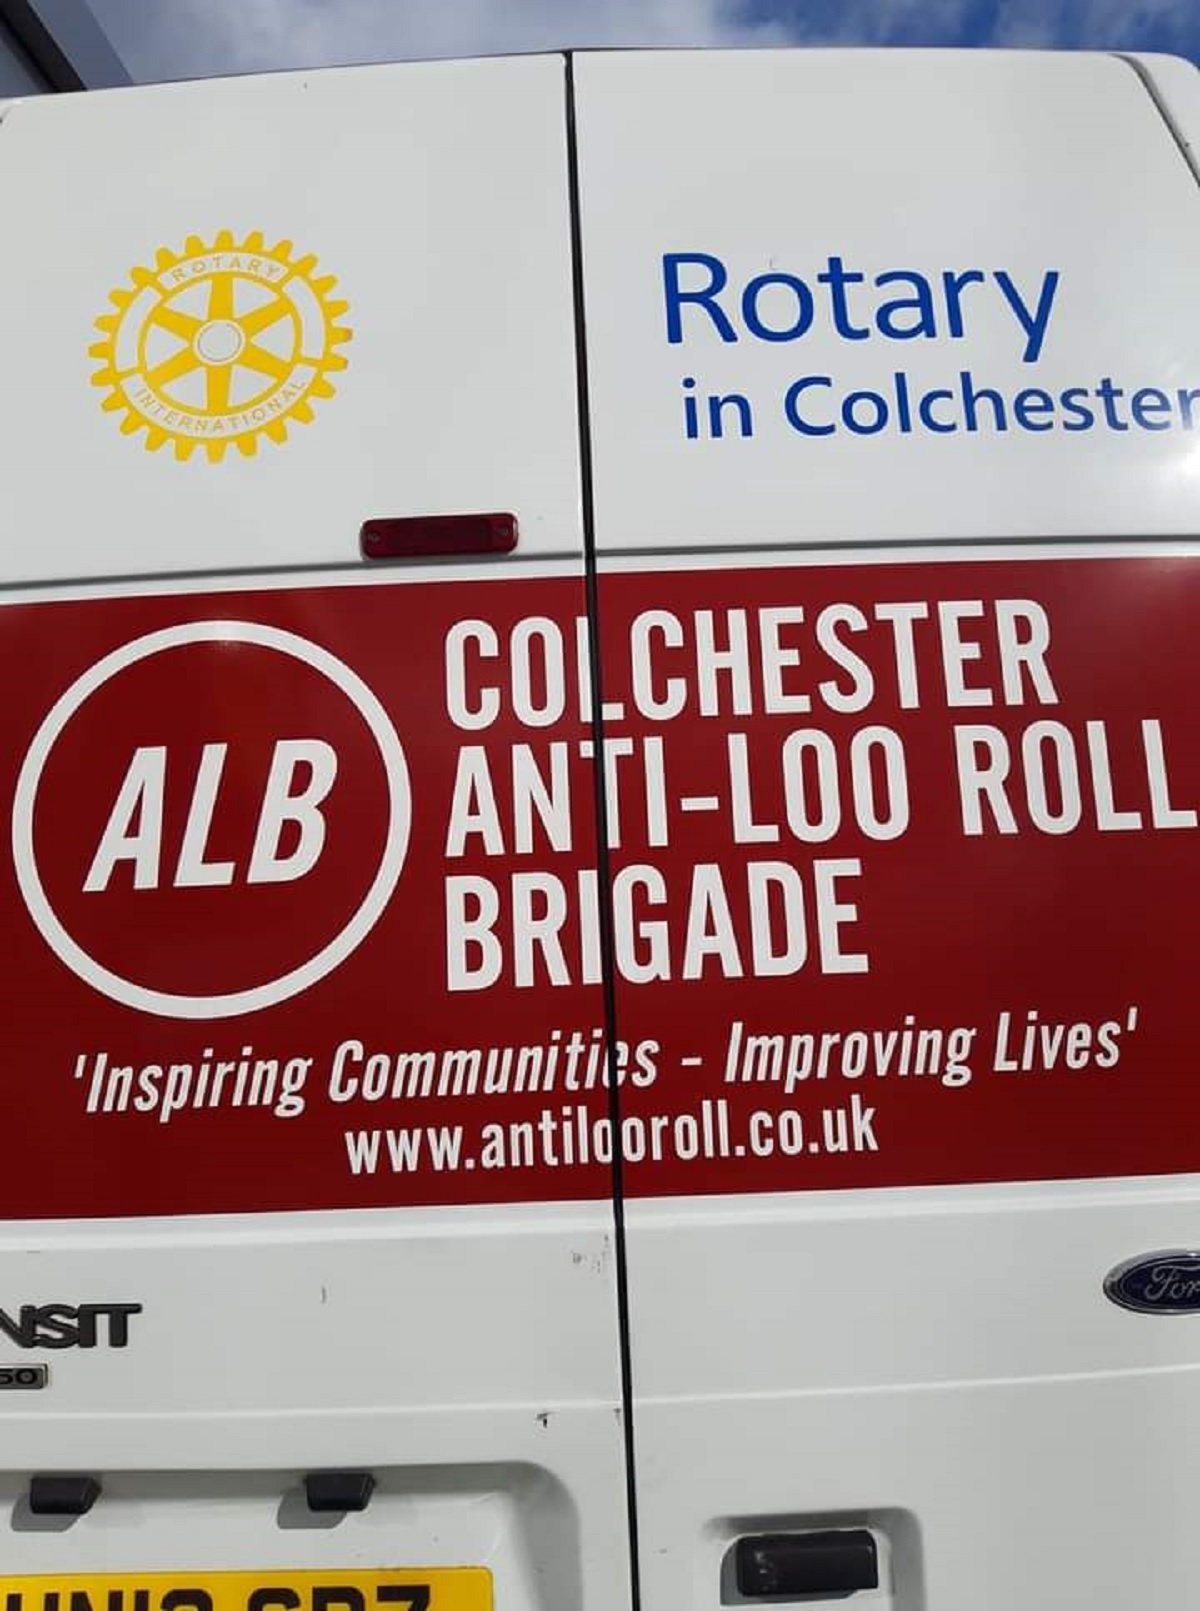 Going places - the Anti-Loo Roll Brigade van, which was bought for the group by the Rotary Club of Colchester